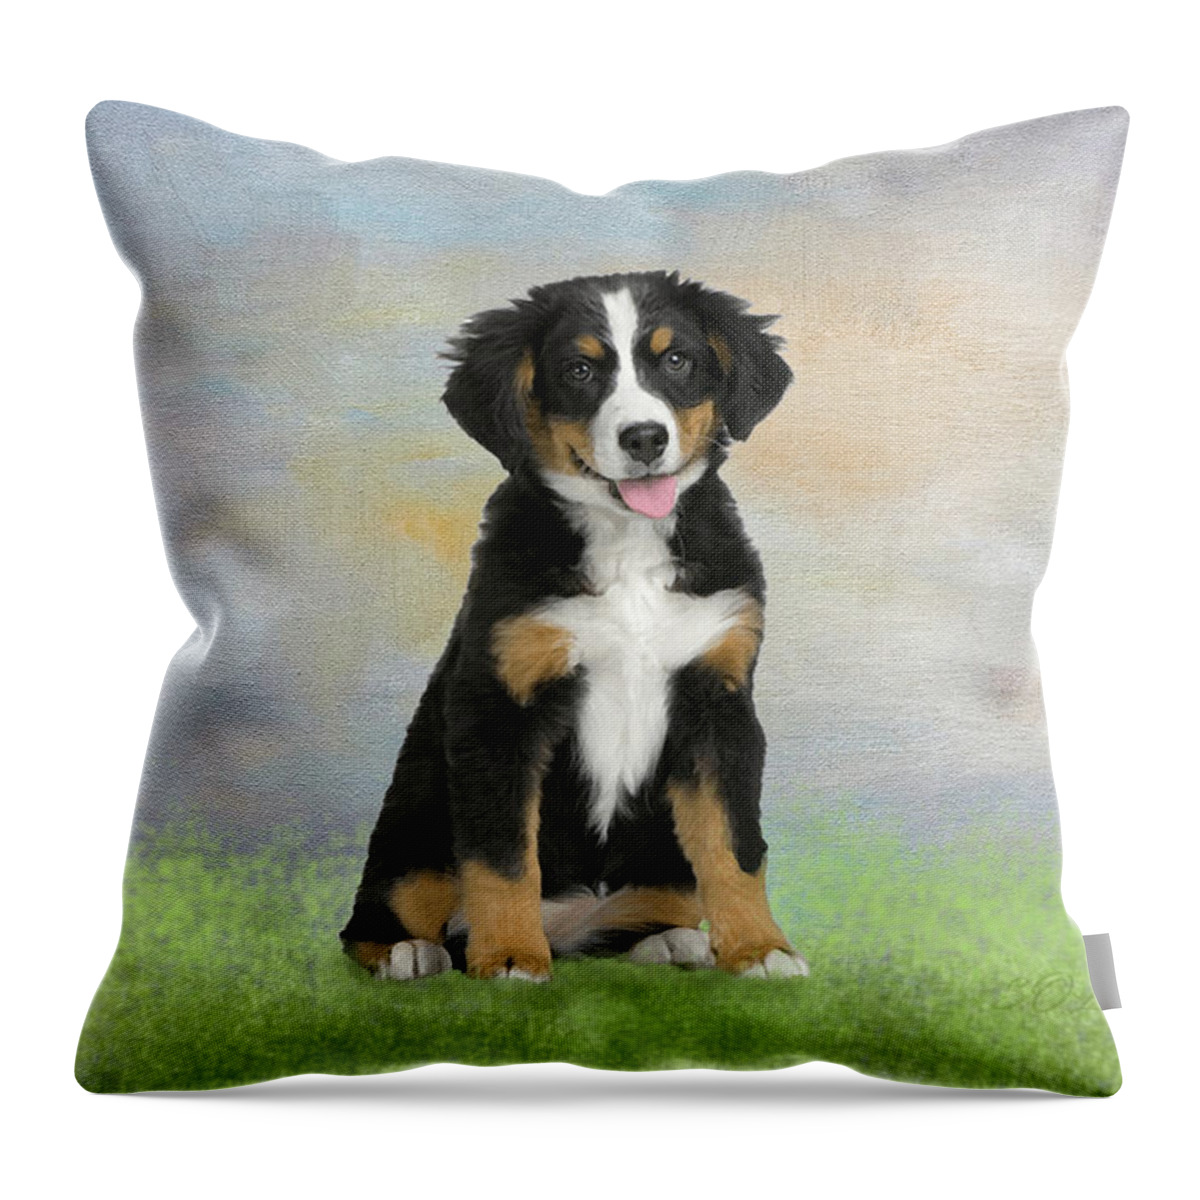 Border Collie Throw Pillow featuring the photograph Border Collie Dog Digital Painting by Sandi OReilly